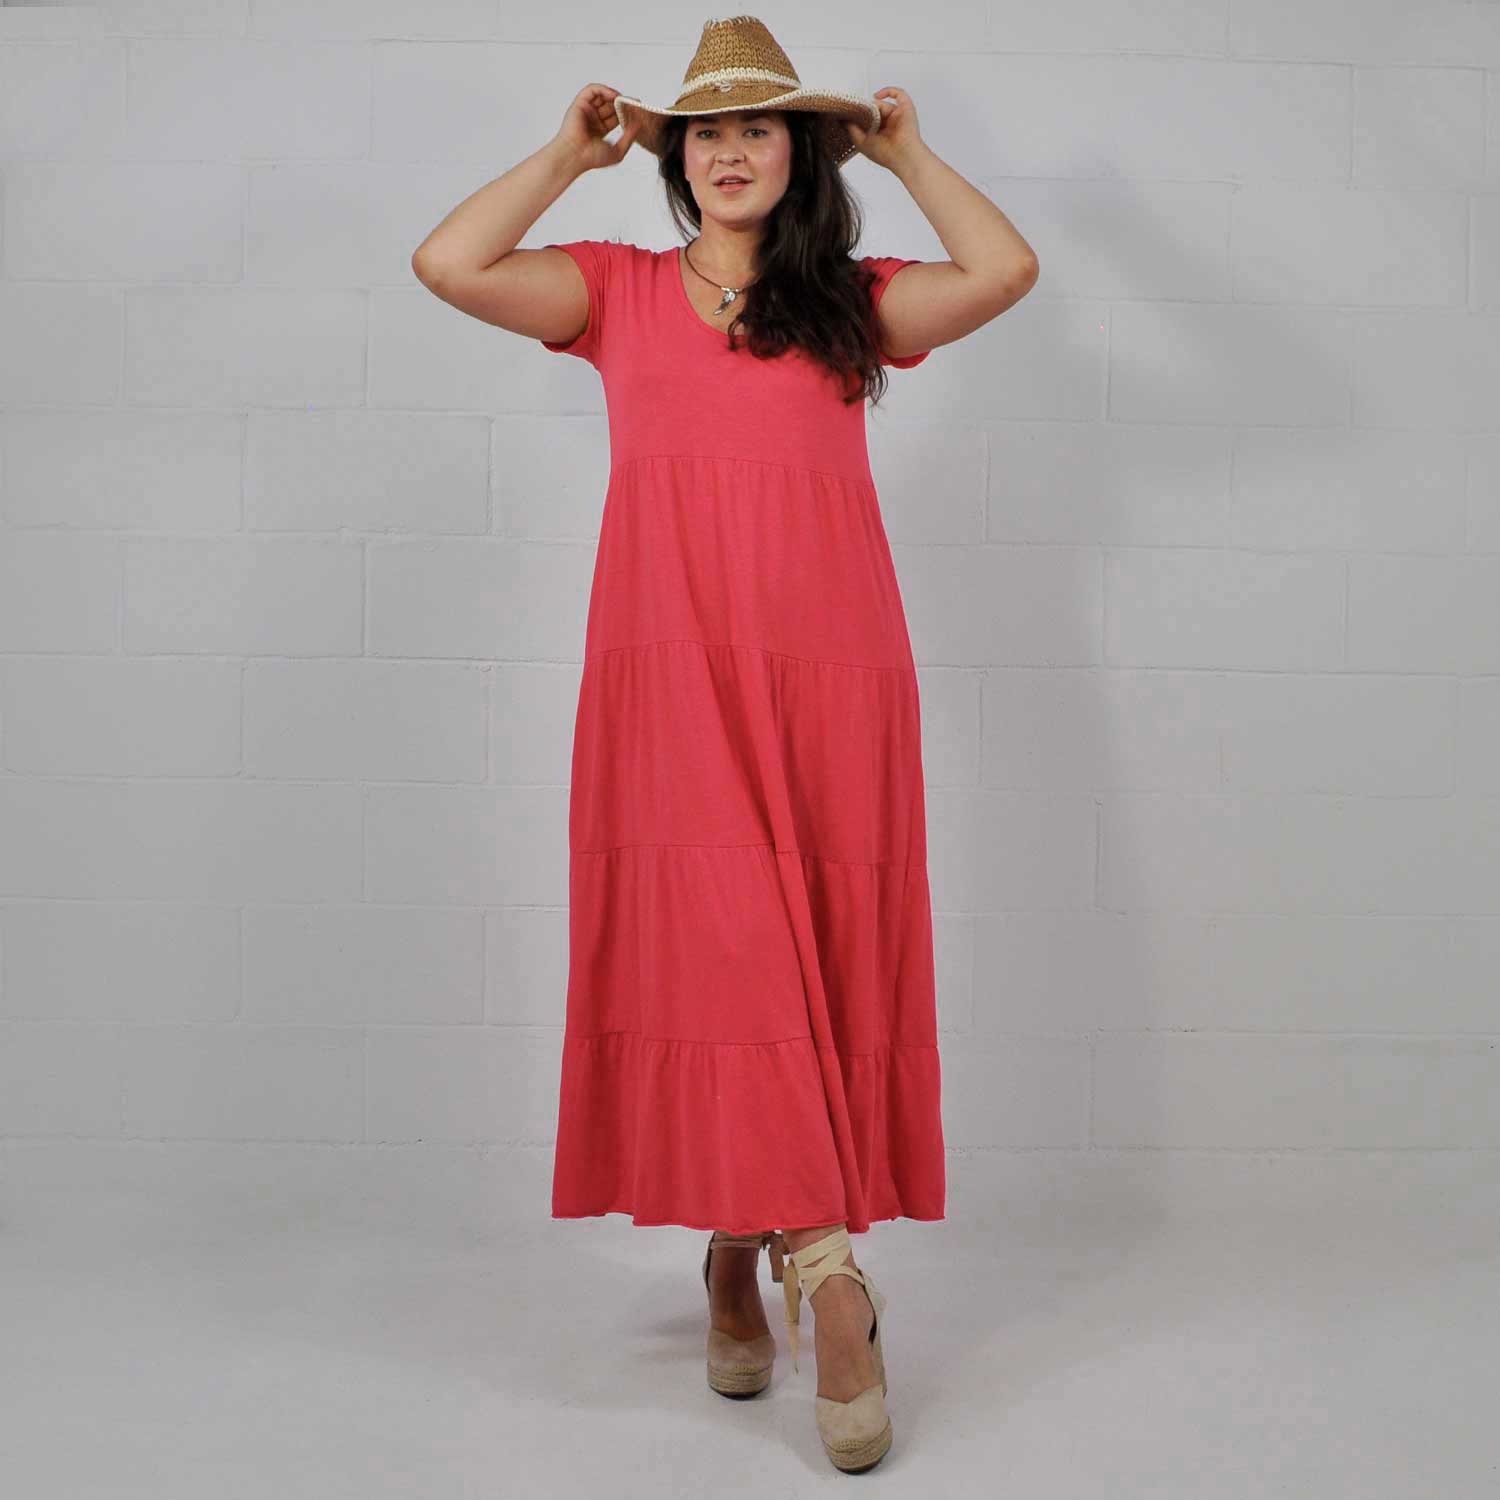 Robe longue coutures corail